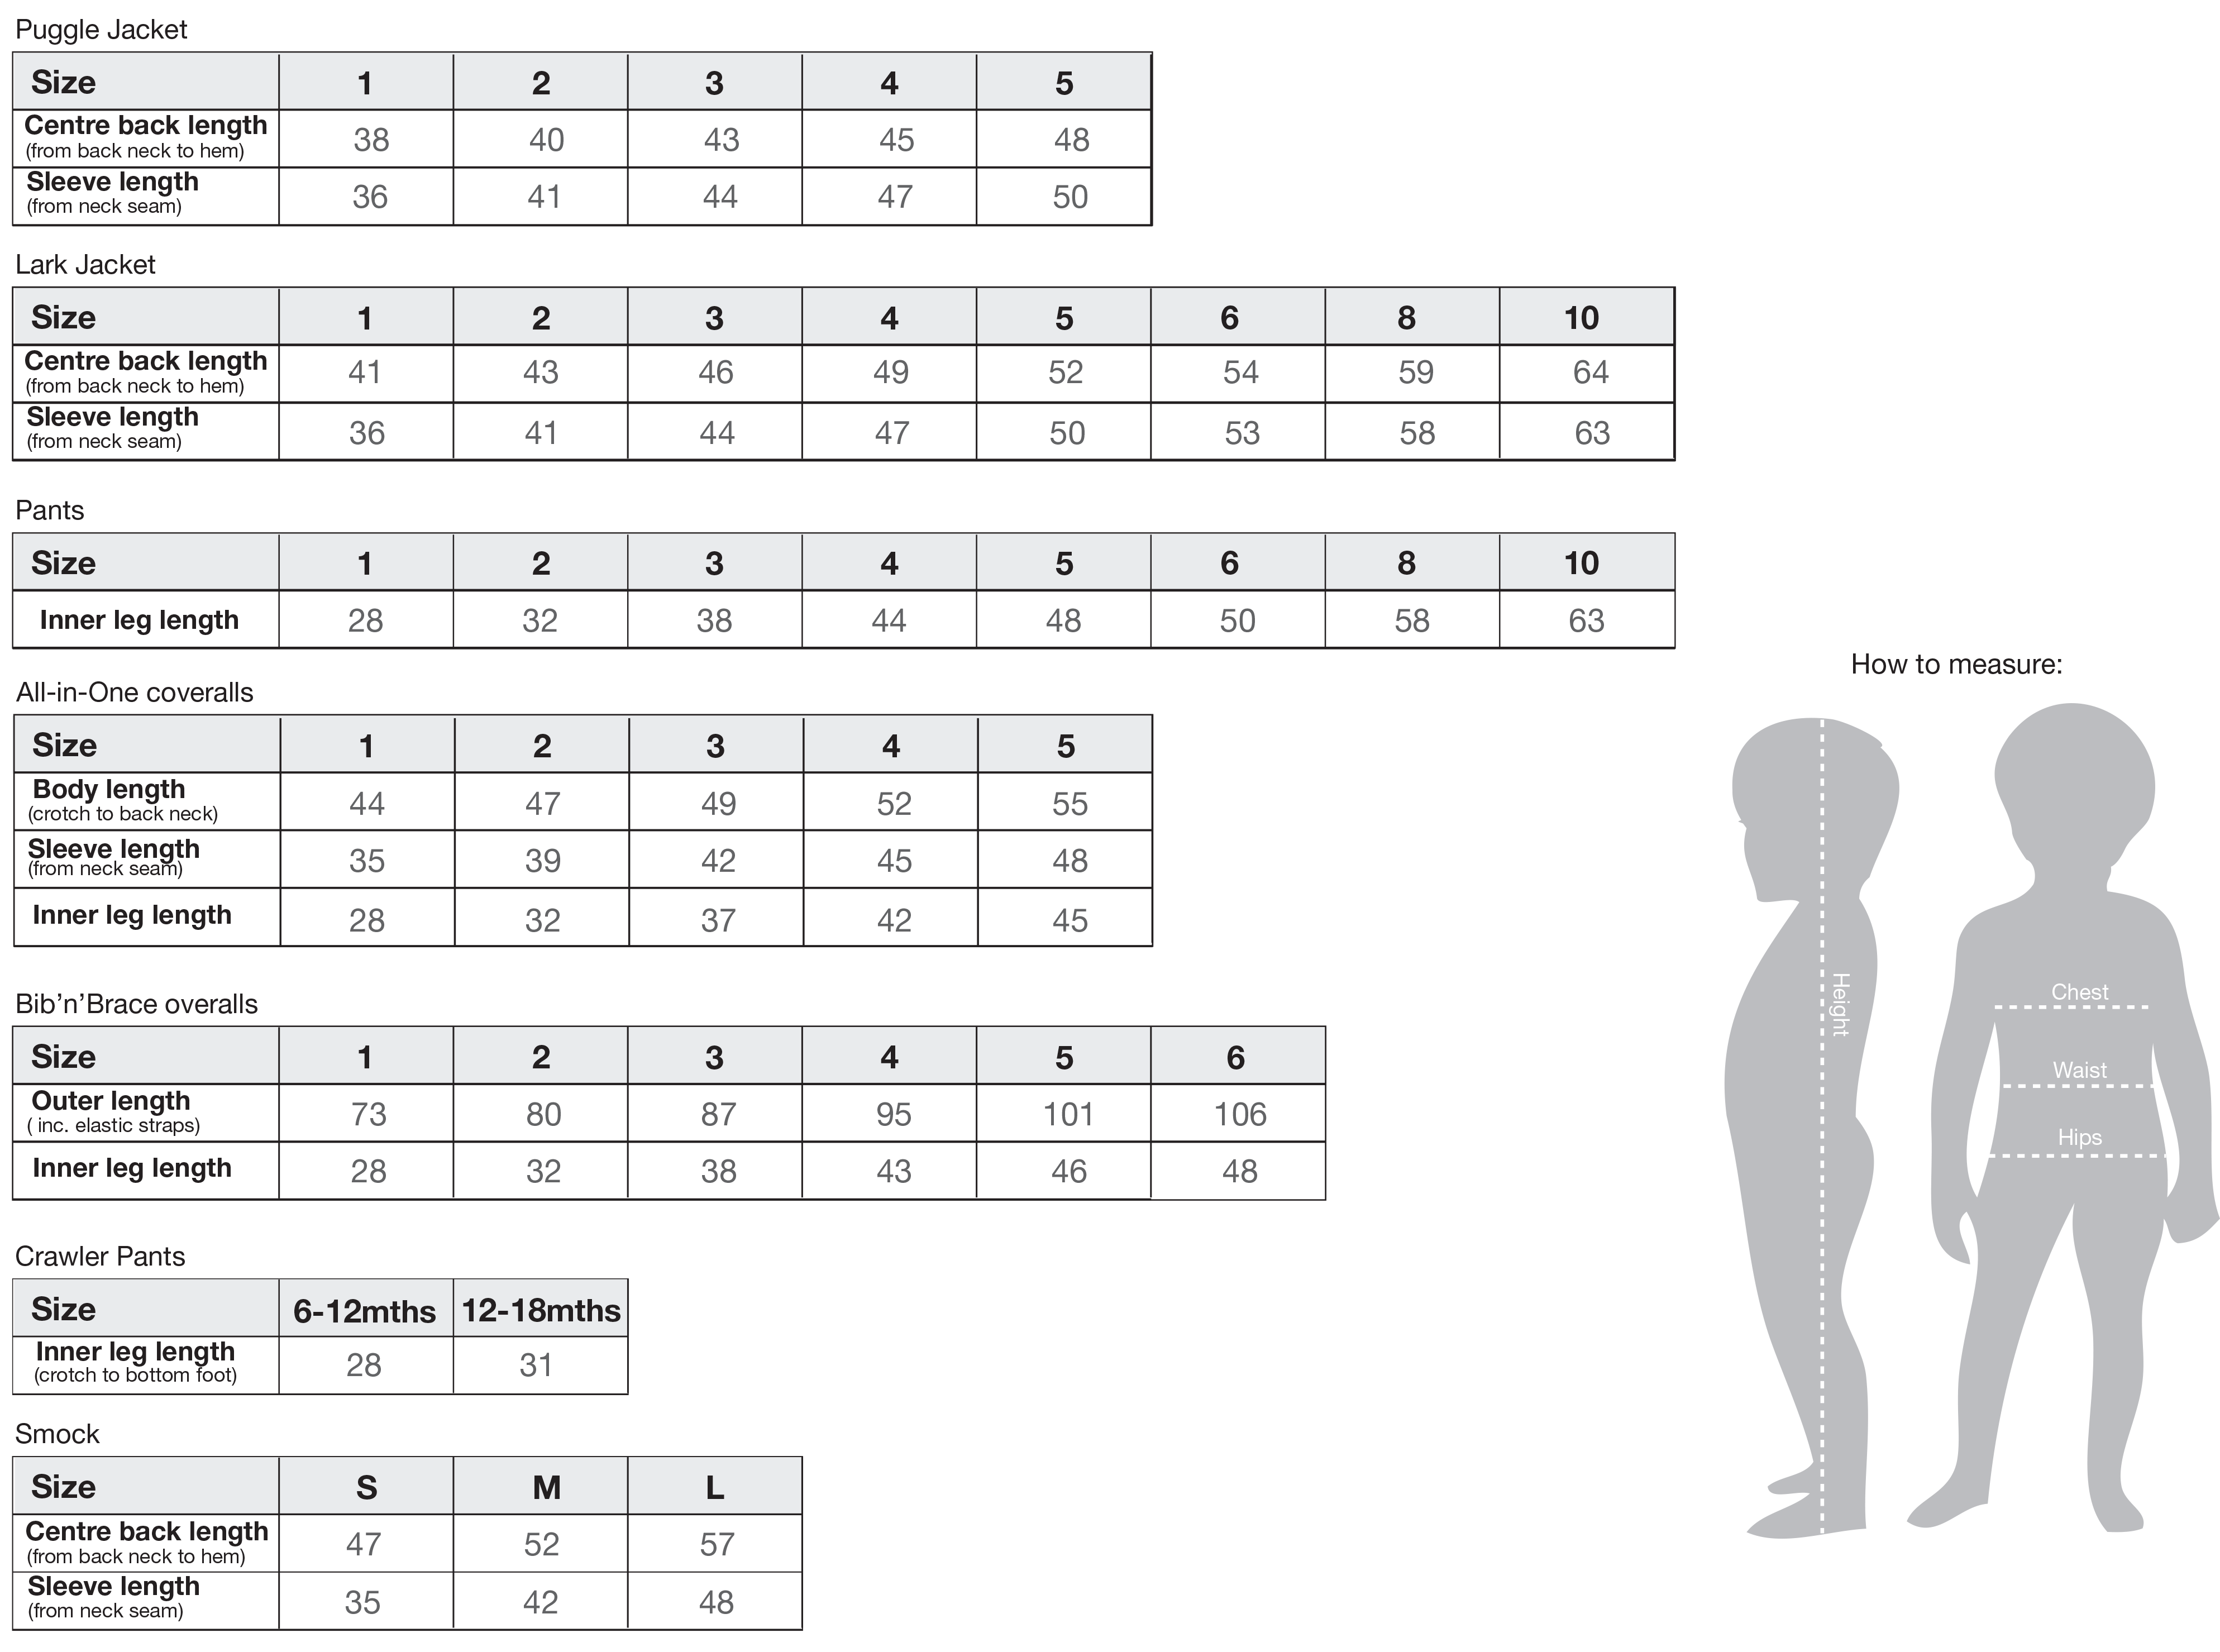 Size Chart For Clothes